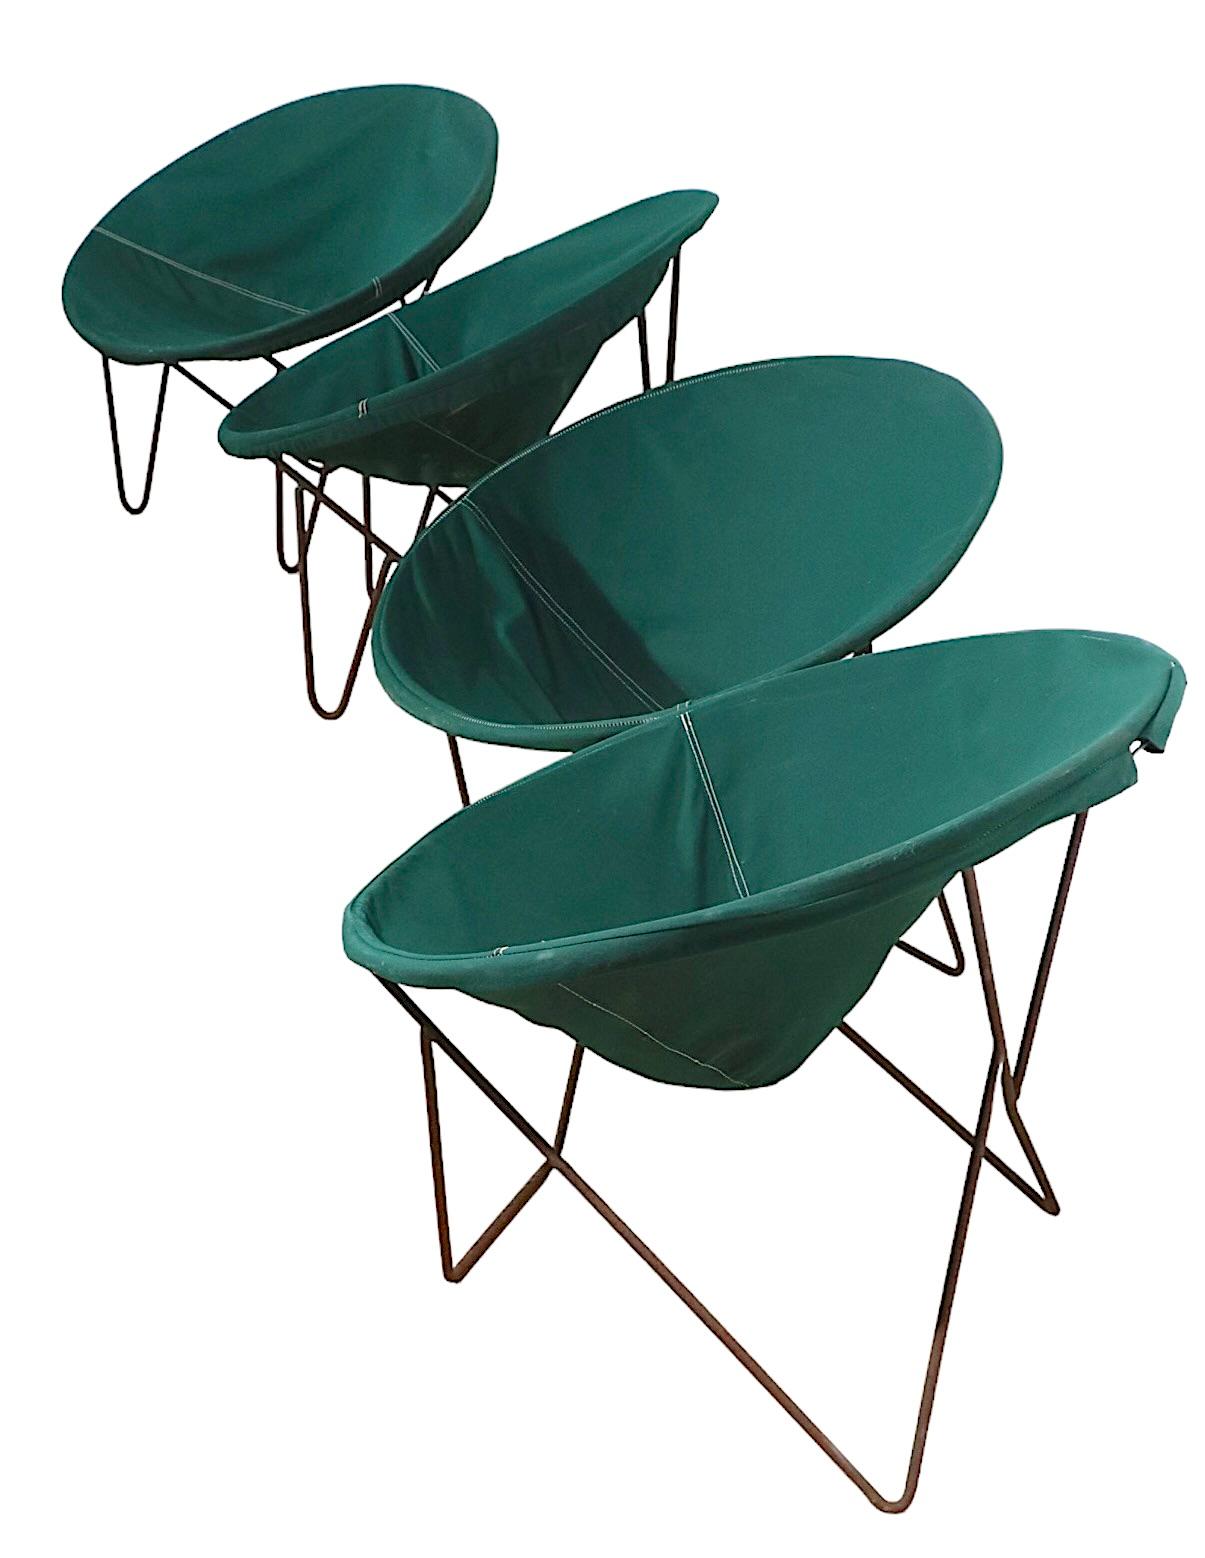 Mid Century Wrought Iron and Canvass Hoop Chairs 4 Available Att. to Hedstrom For Sale 5